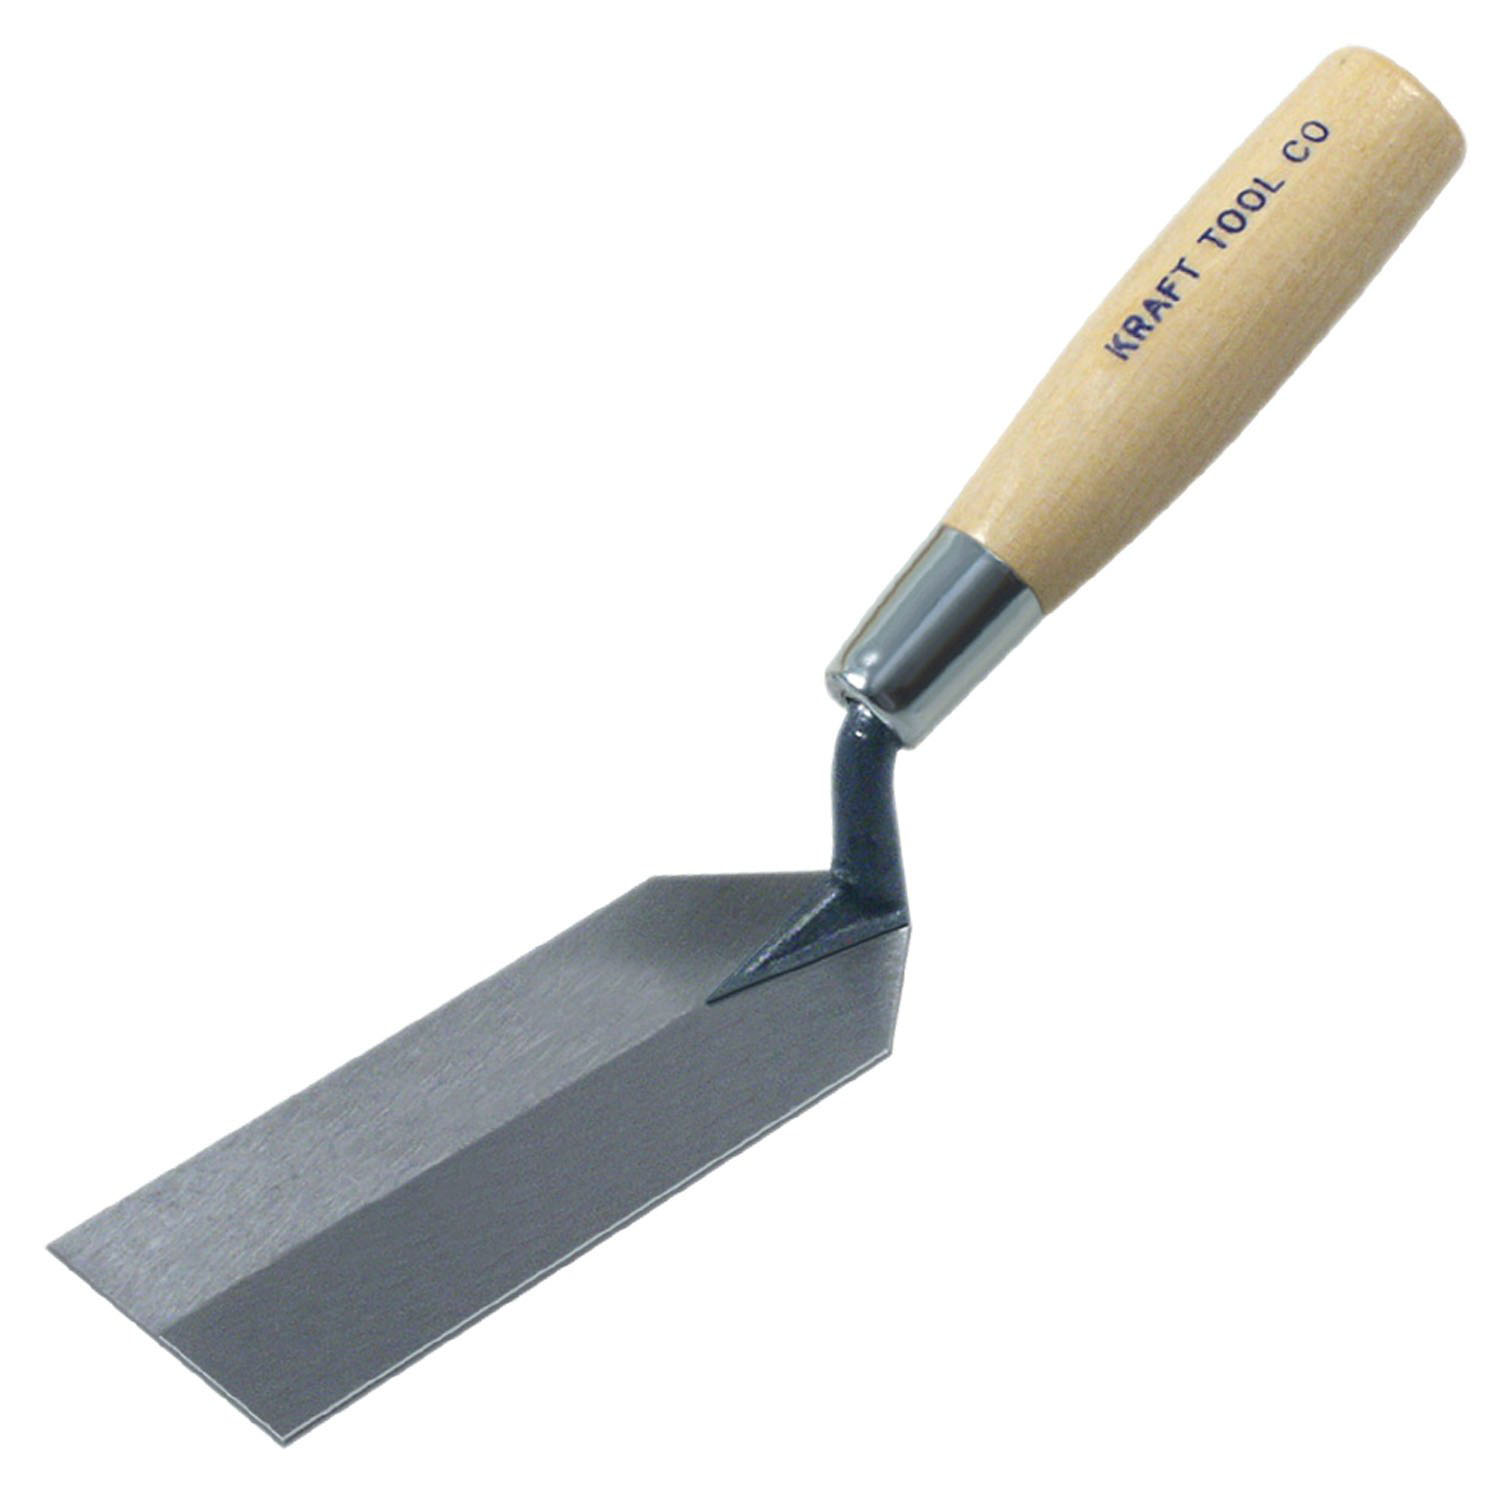 MARGIN TROWEL WITH WOOD HANDLE (MULTIPLE SIZES AVAILABLE)